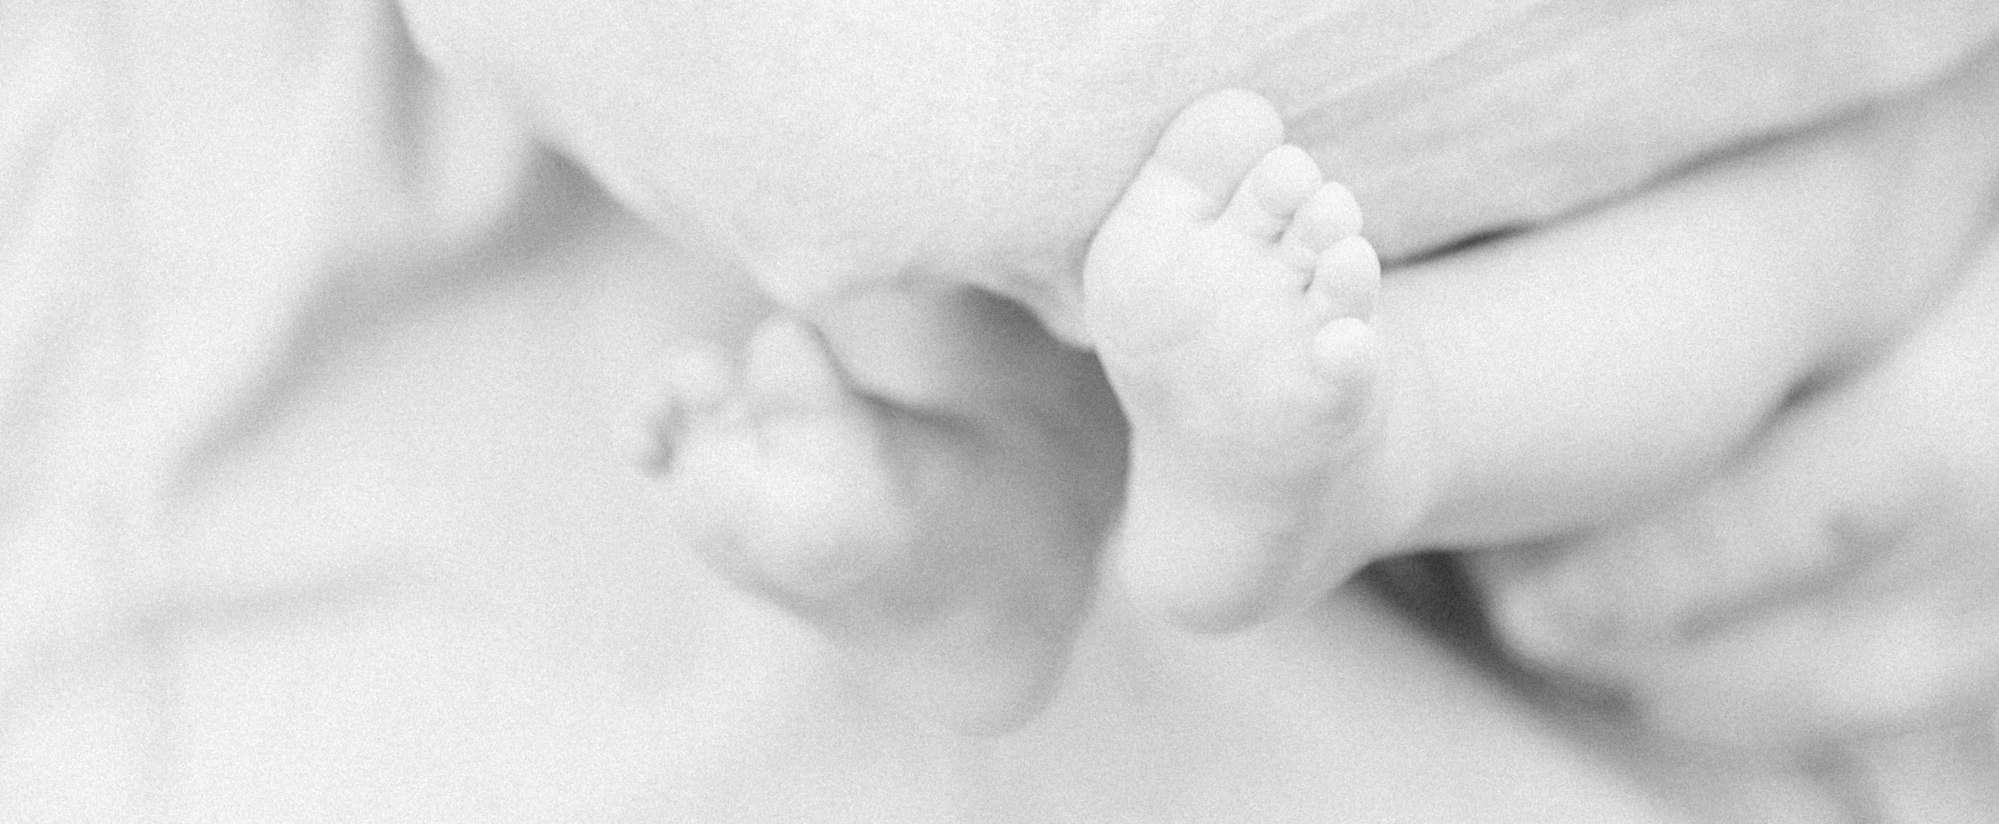 Black and white detailed photo of baby toes, Emily VanderBeek Photography, Portrait and Family photography, Niagara Photographer, Champlain Photographer, Vaudreuil-Soulanges Photographer, candid photography, authentic photography.